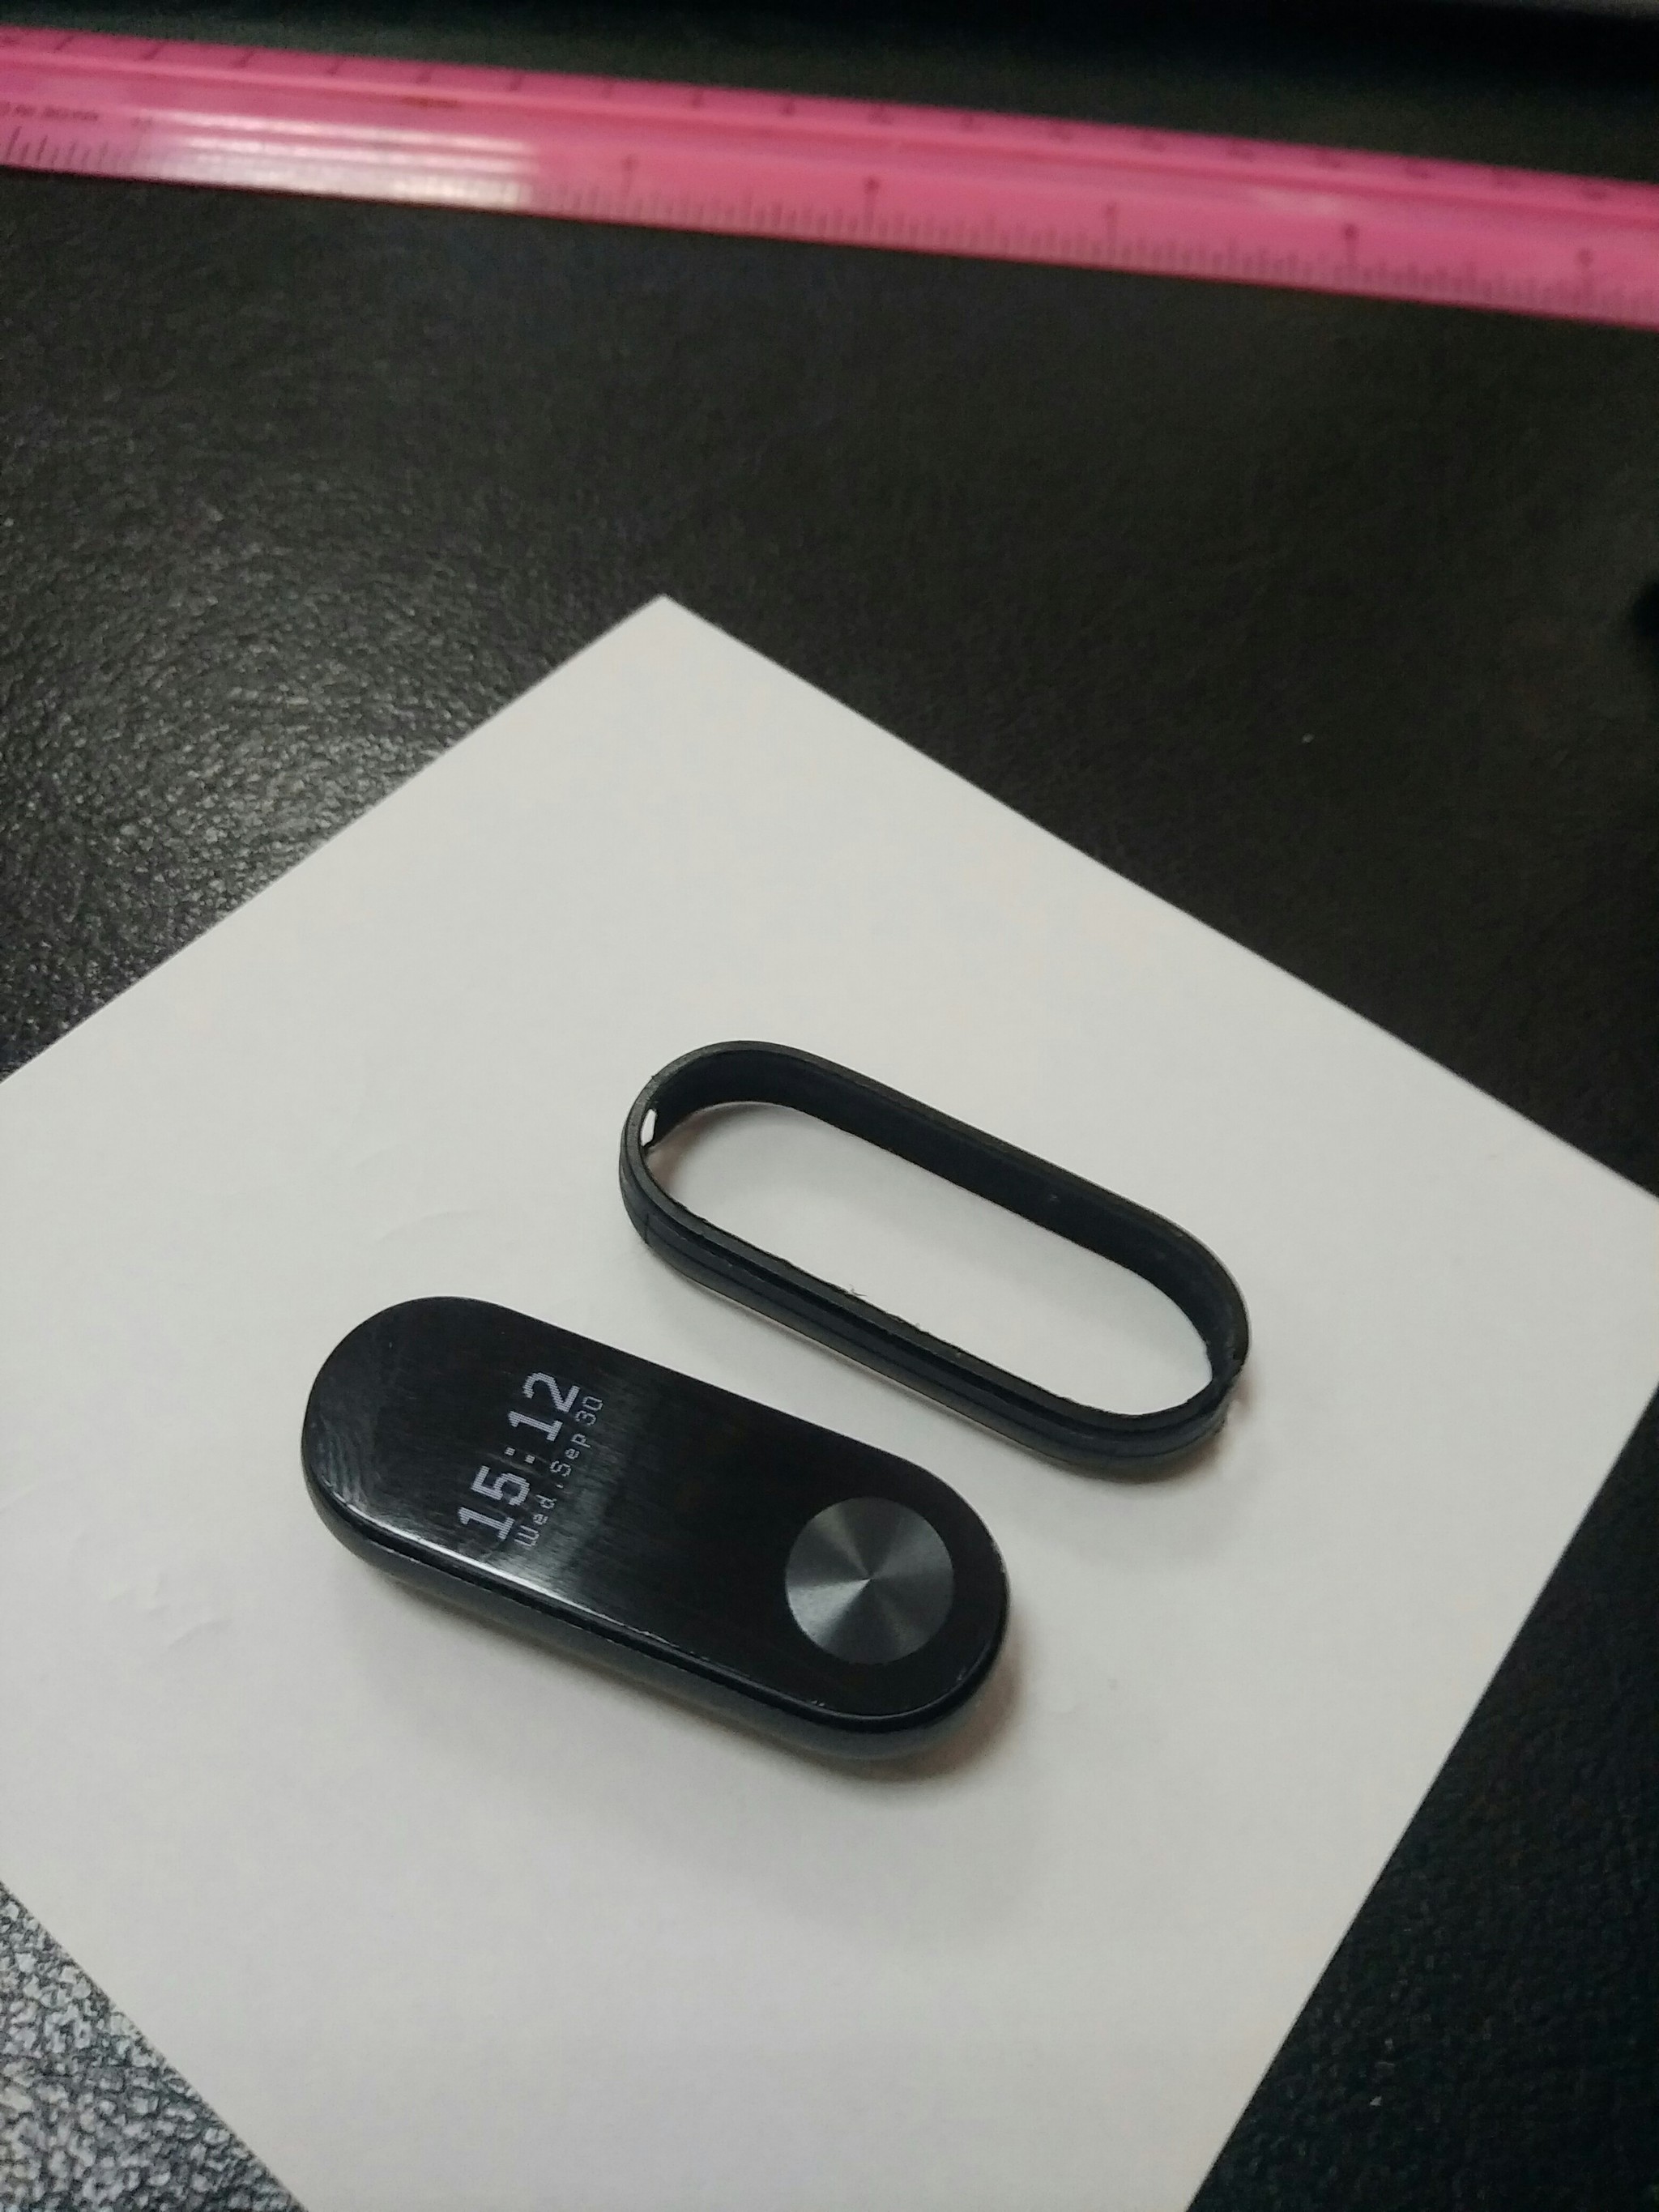 Found MI Band 2 - Find, Moscow, No rating, Mi band 2